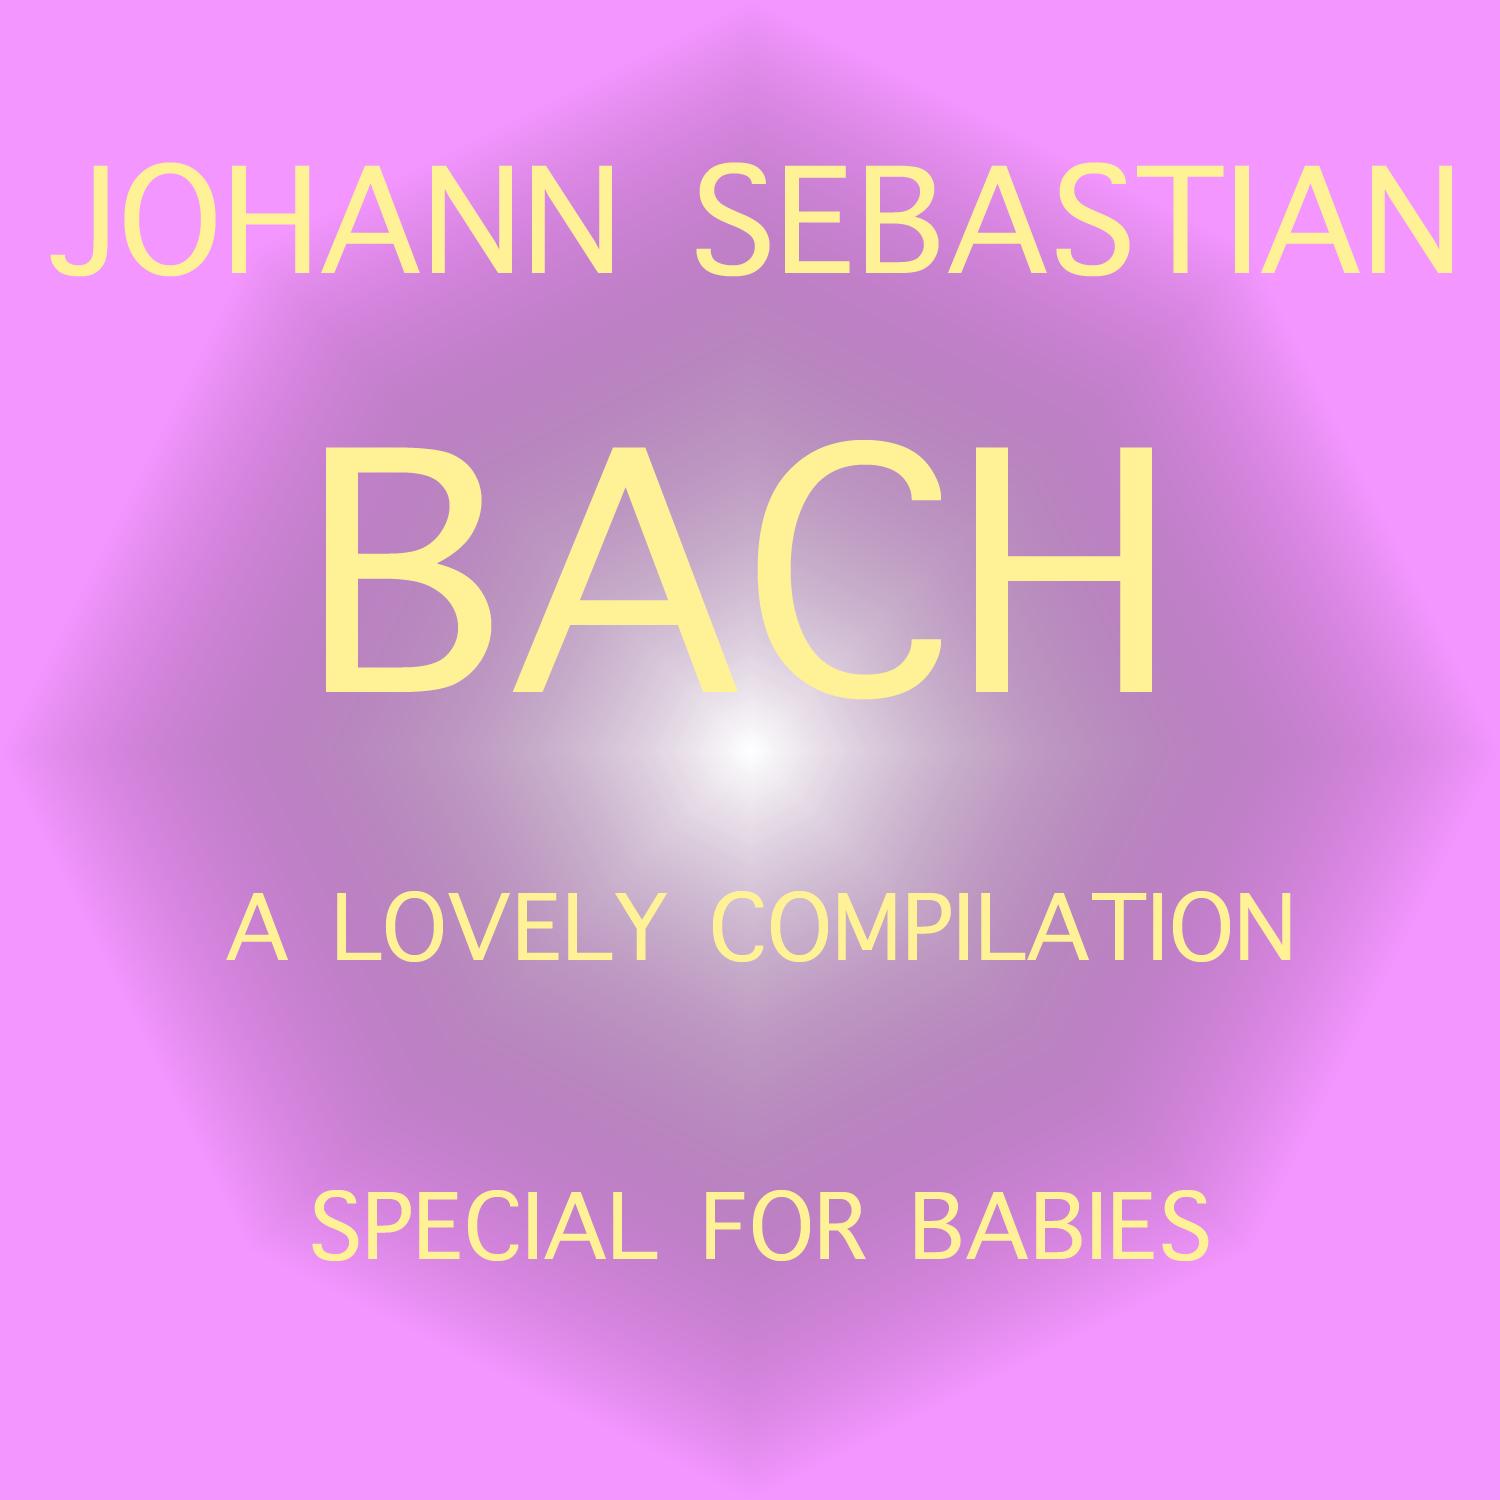 J.S. Bach for Babies